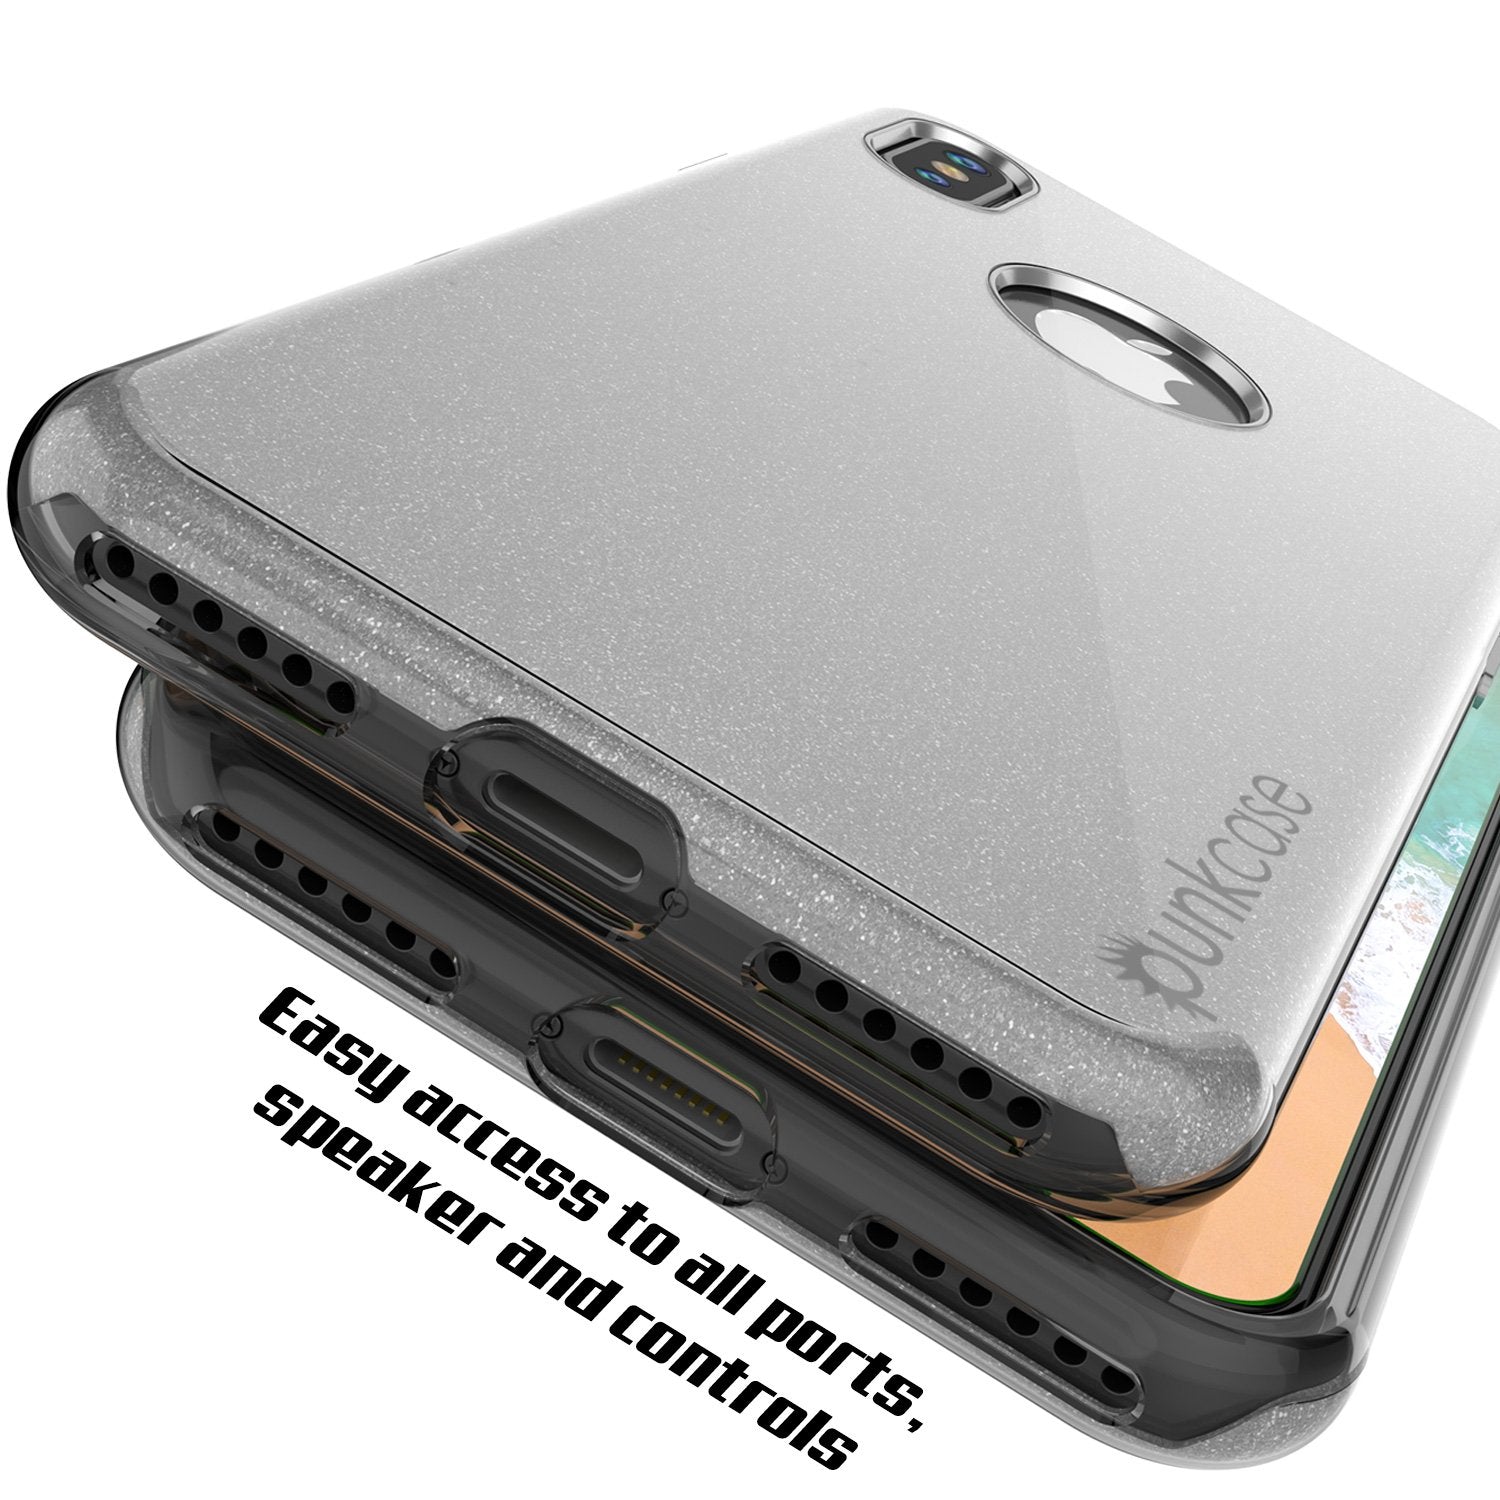 iPhone X Case, Punkcase Galactic 2.0 Series Ultra Slim w/ Tempered Glass Screen Protector | [Silver]